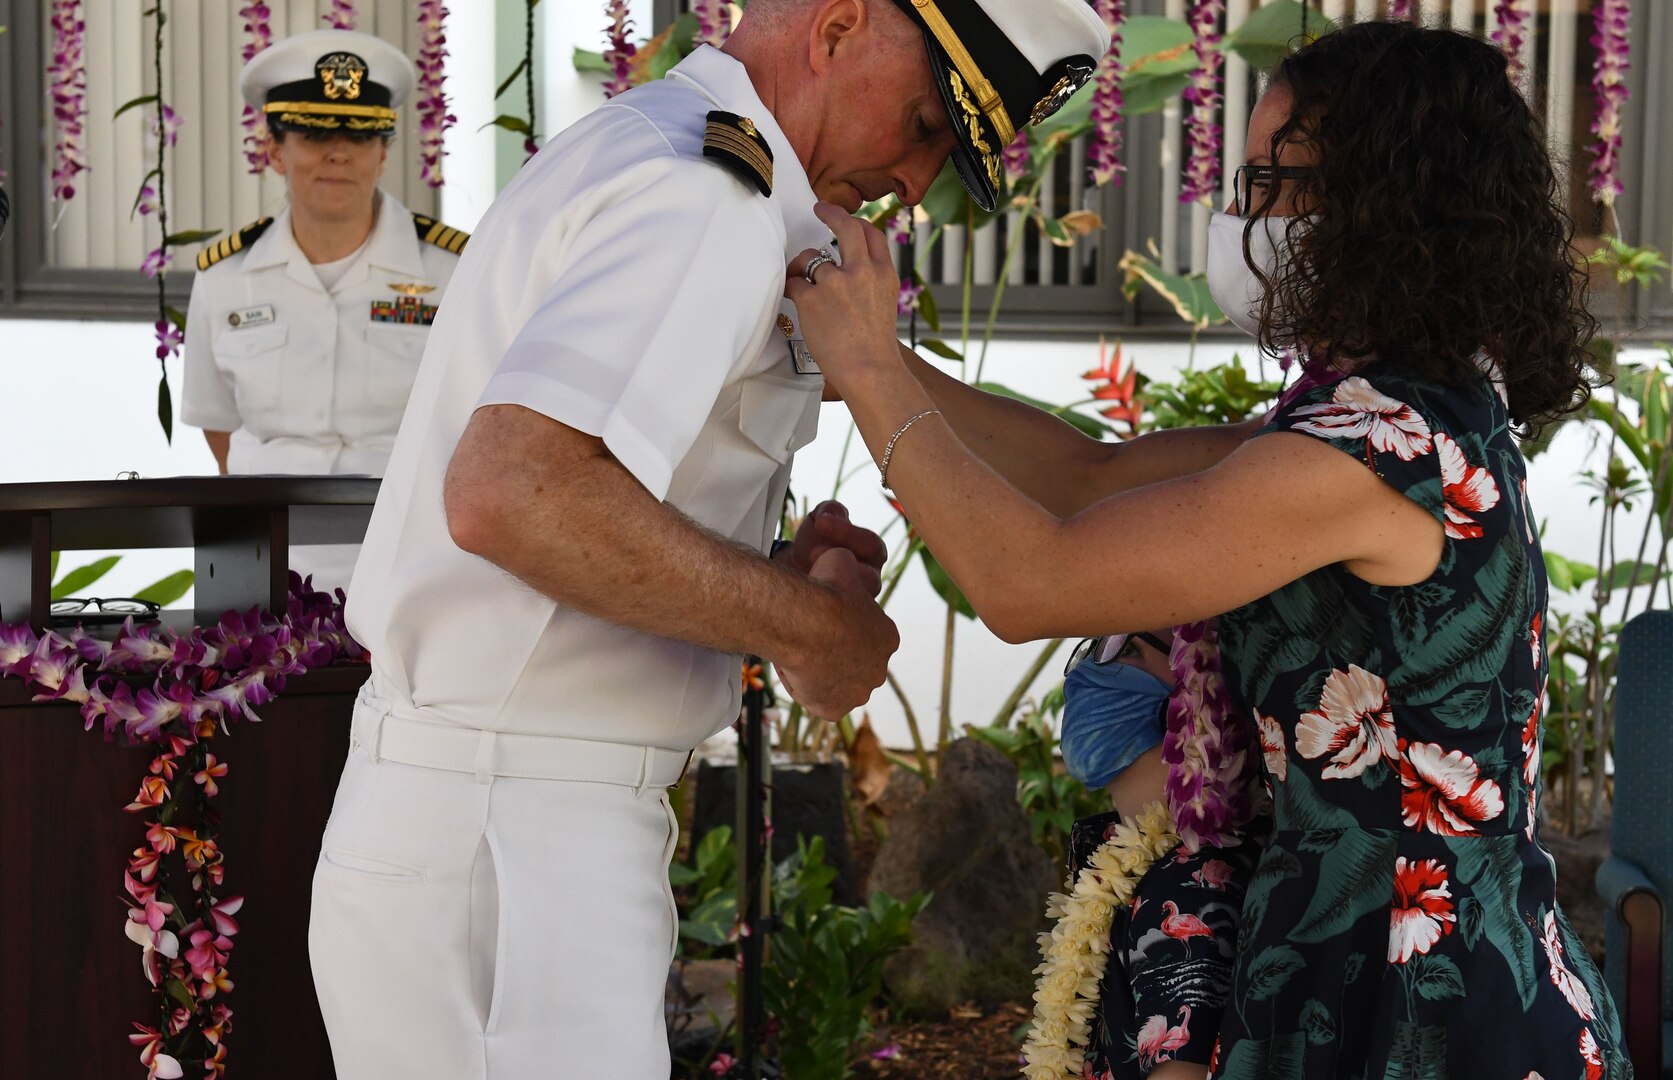 Captain Christopher Tepera receives the command pin from his wife.